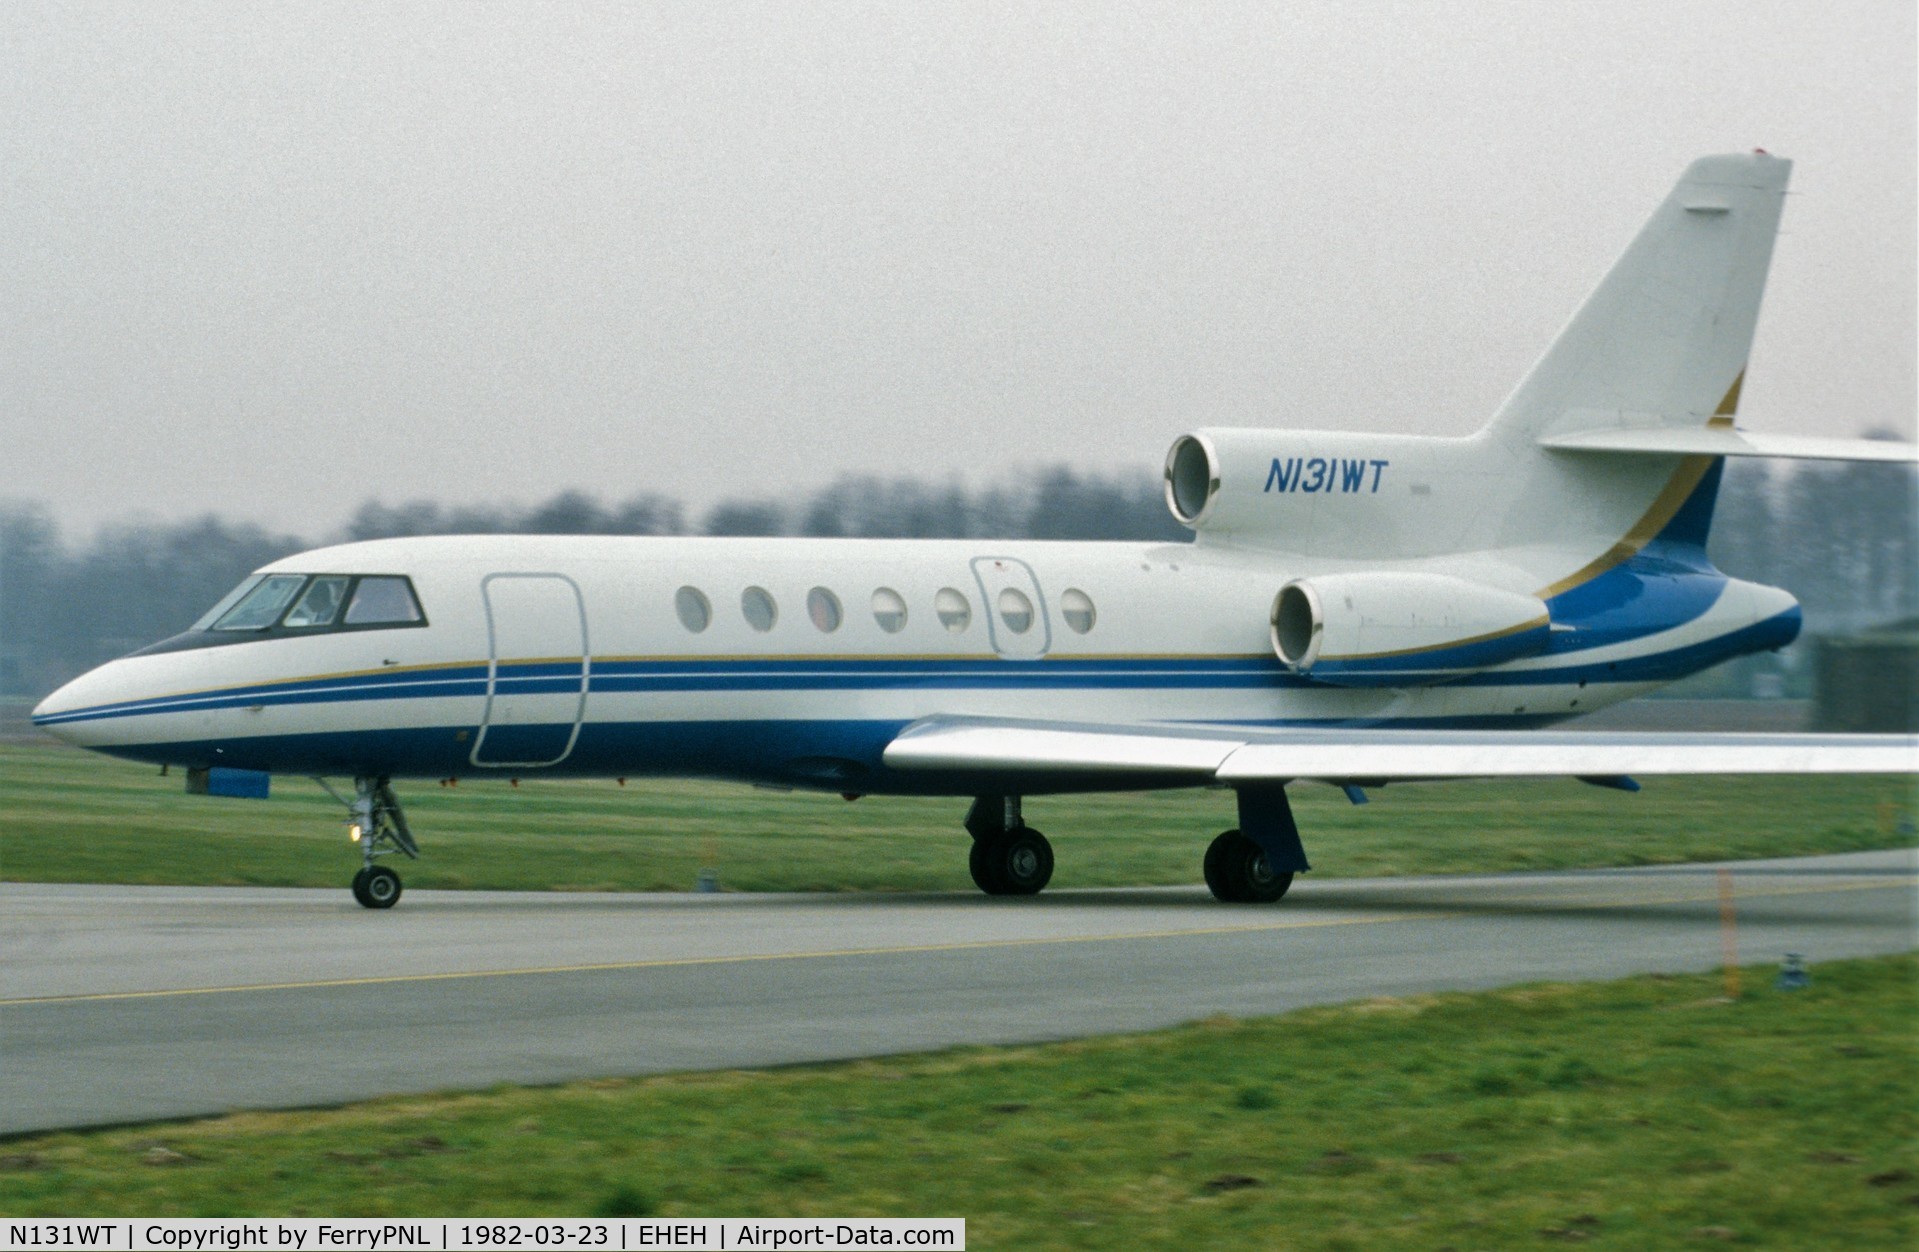 N131WT, 1980 Dassault Falcon 50 C/N 28, IBM Falcon 50, one of several Falcons based in Paris, France